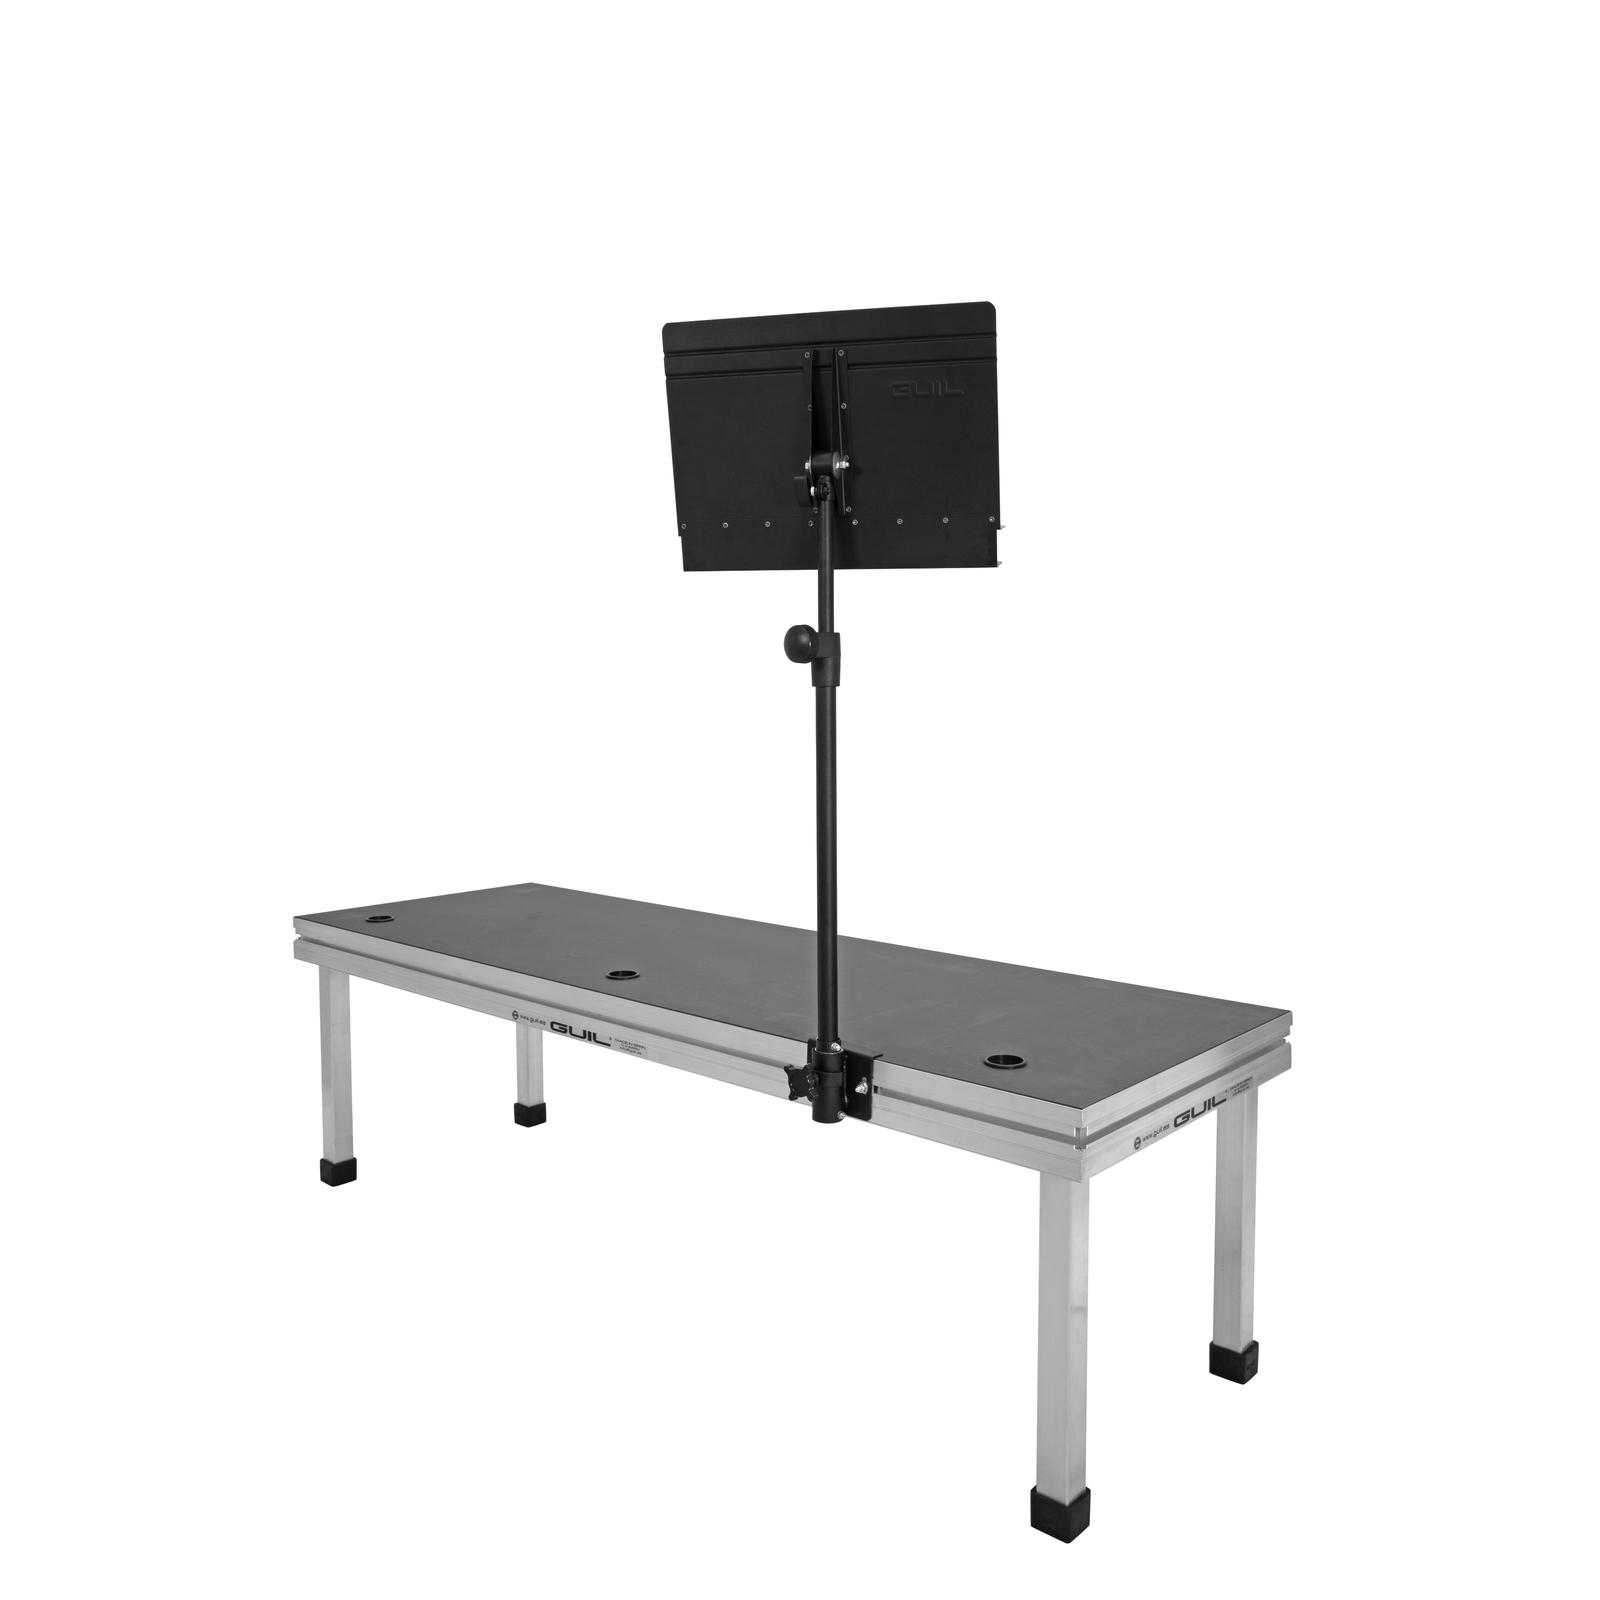 GUIL AT/TM-01/440 Music stand